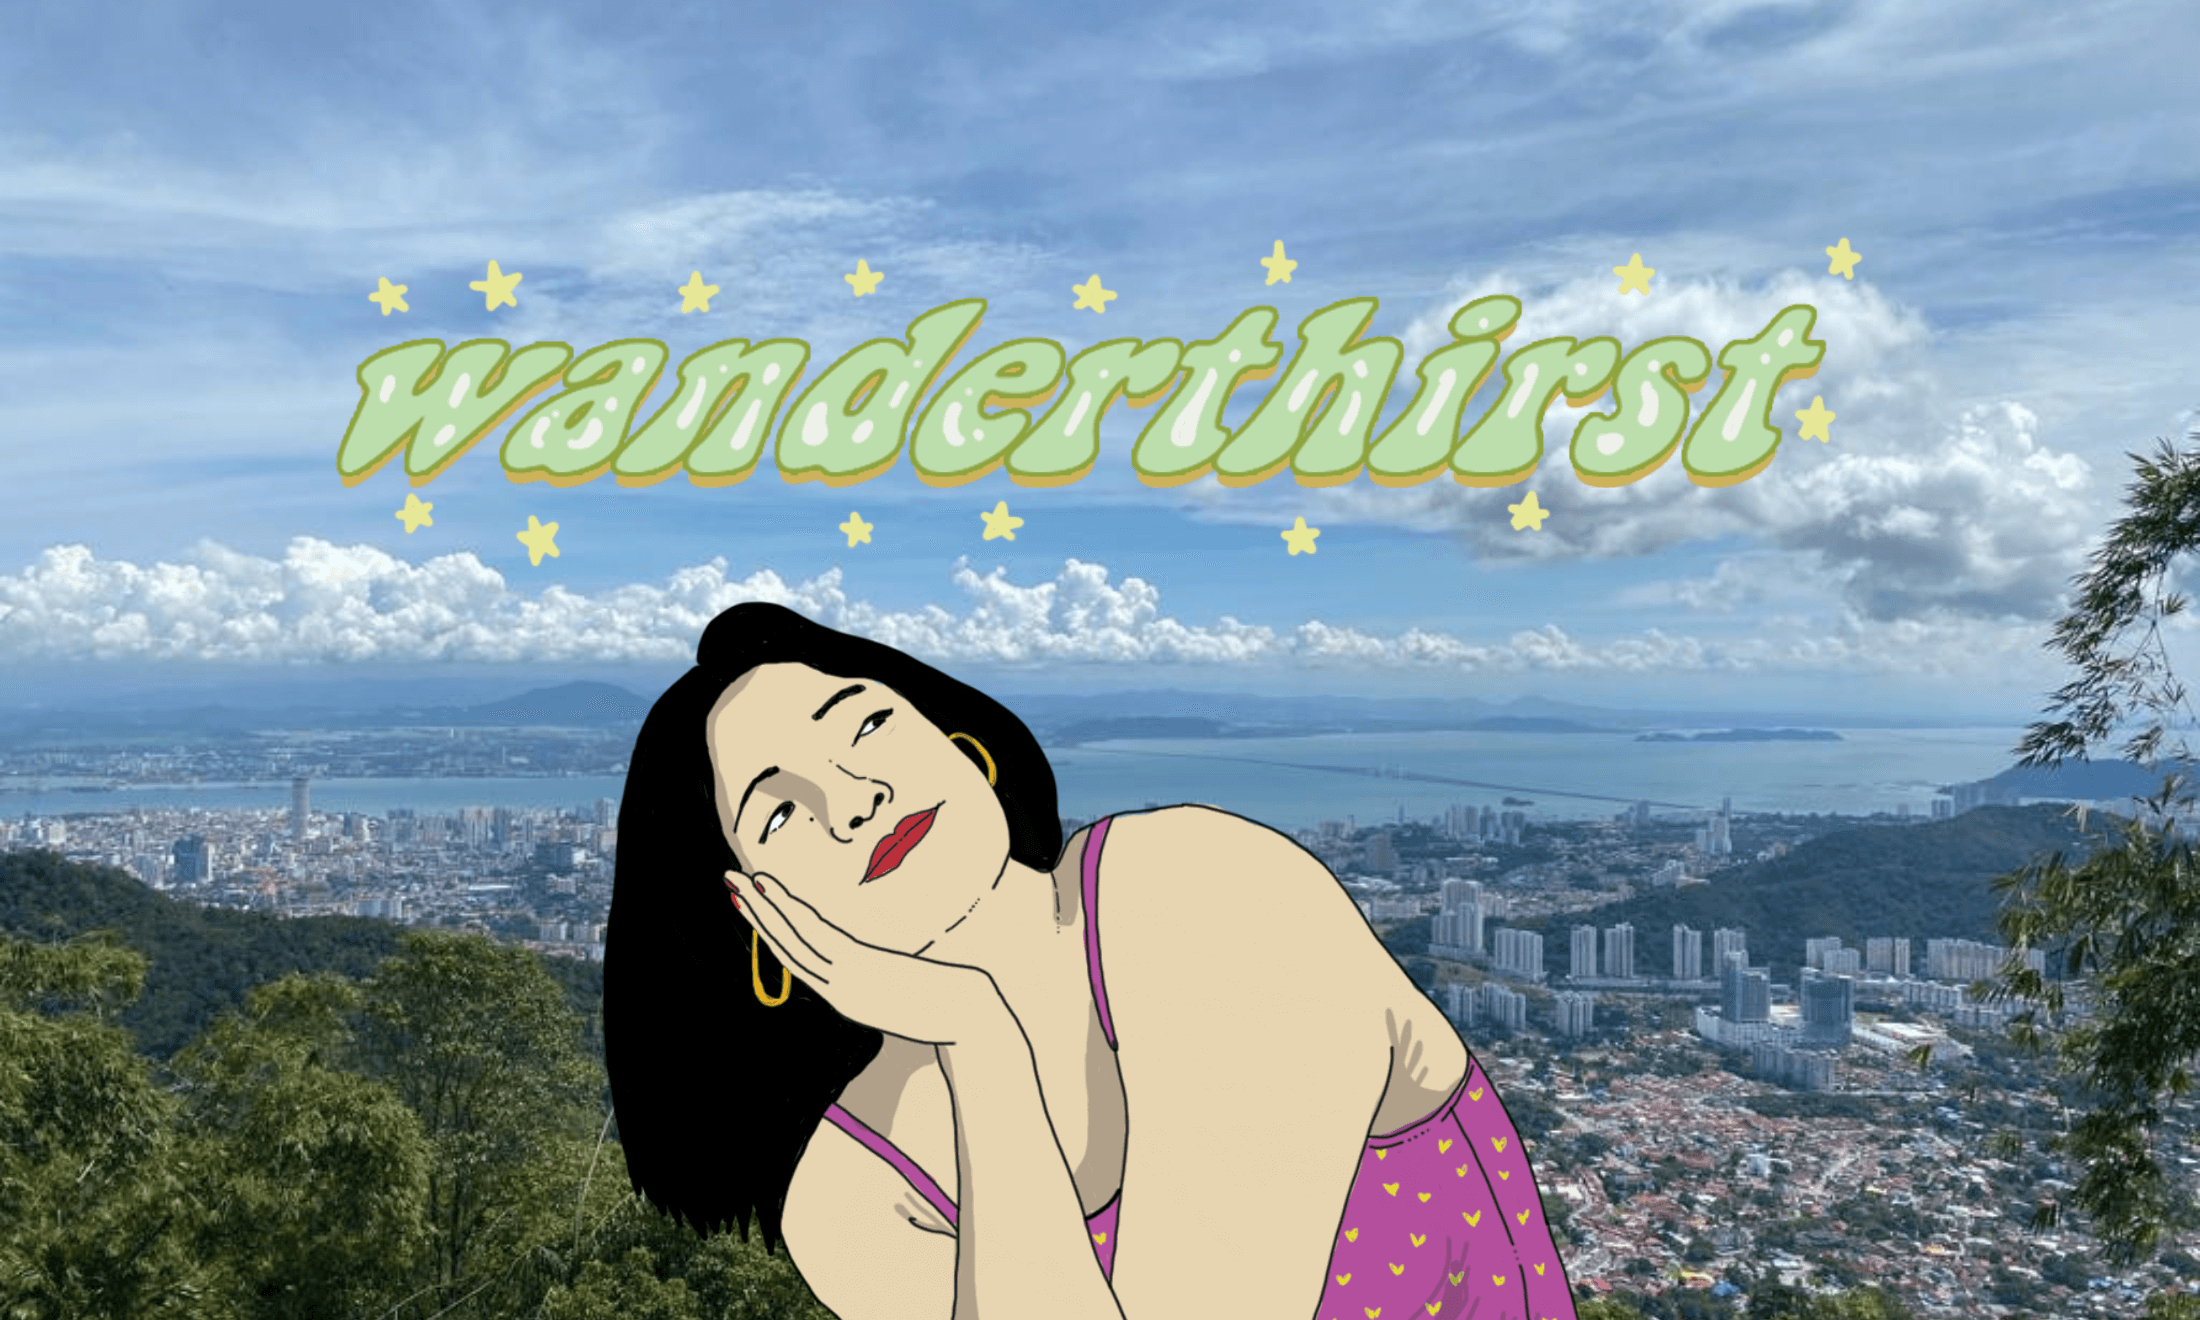 A photograph of a daytime skyline of a town with mountains, sea and clouds is in the background. in the foreground is the word wanderthirst in green font, and a digital illustration of a woman